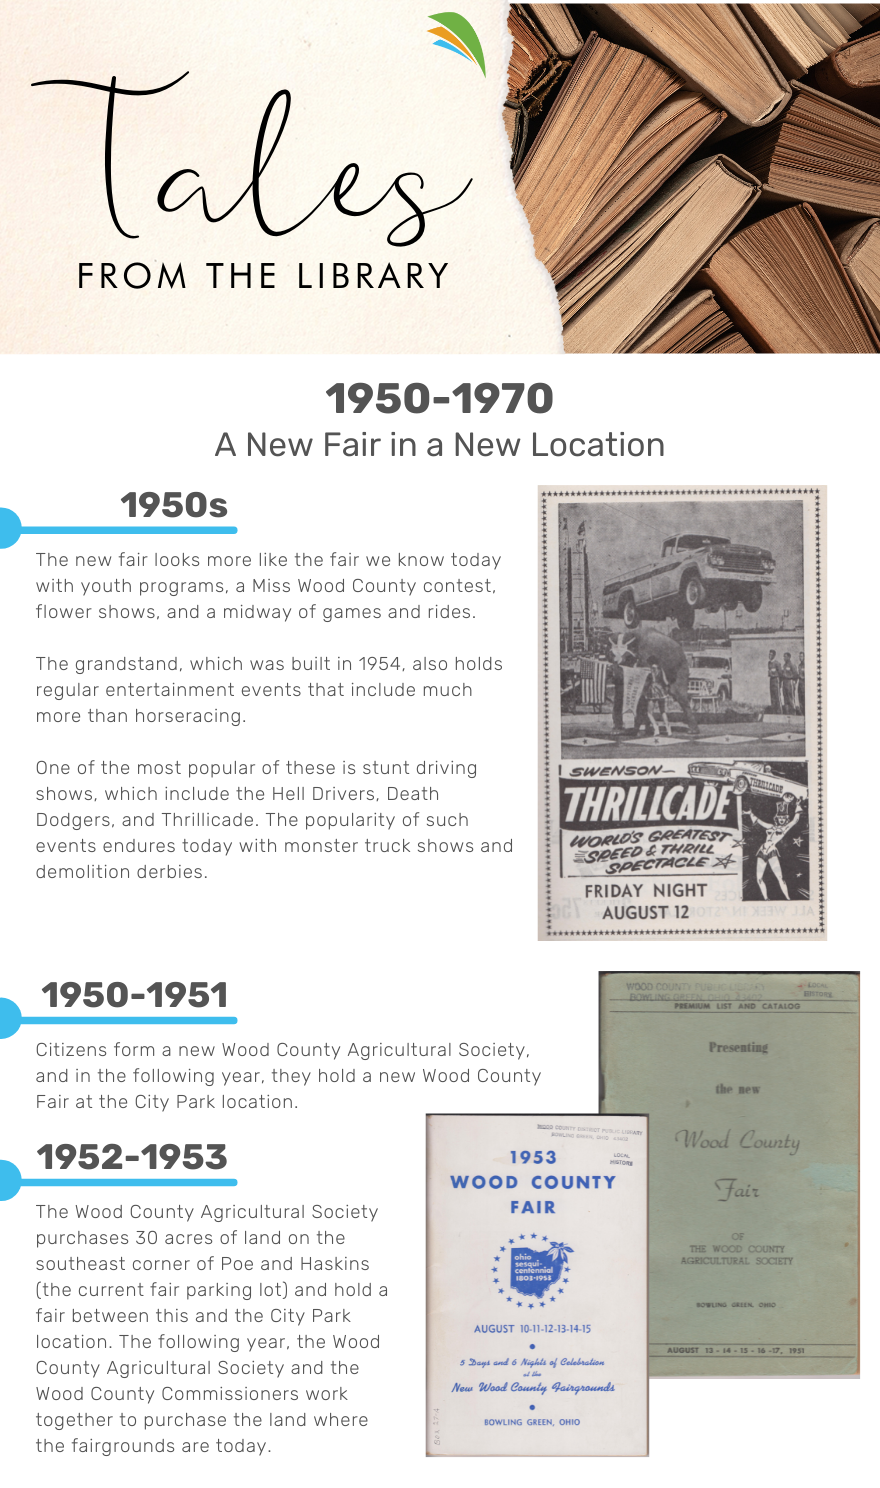 A timeline of events during the fair from 1950-1970